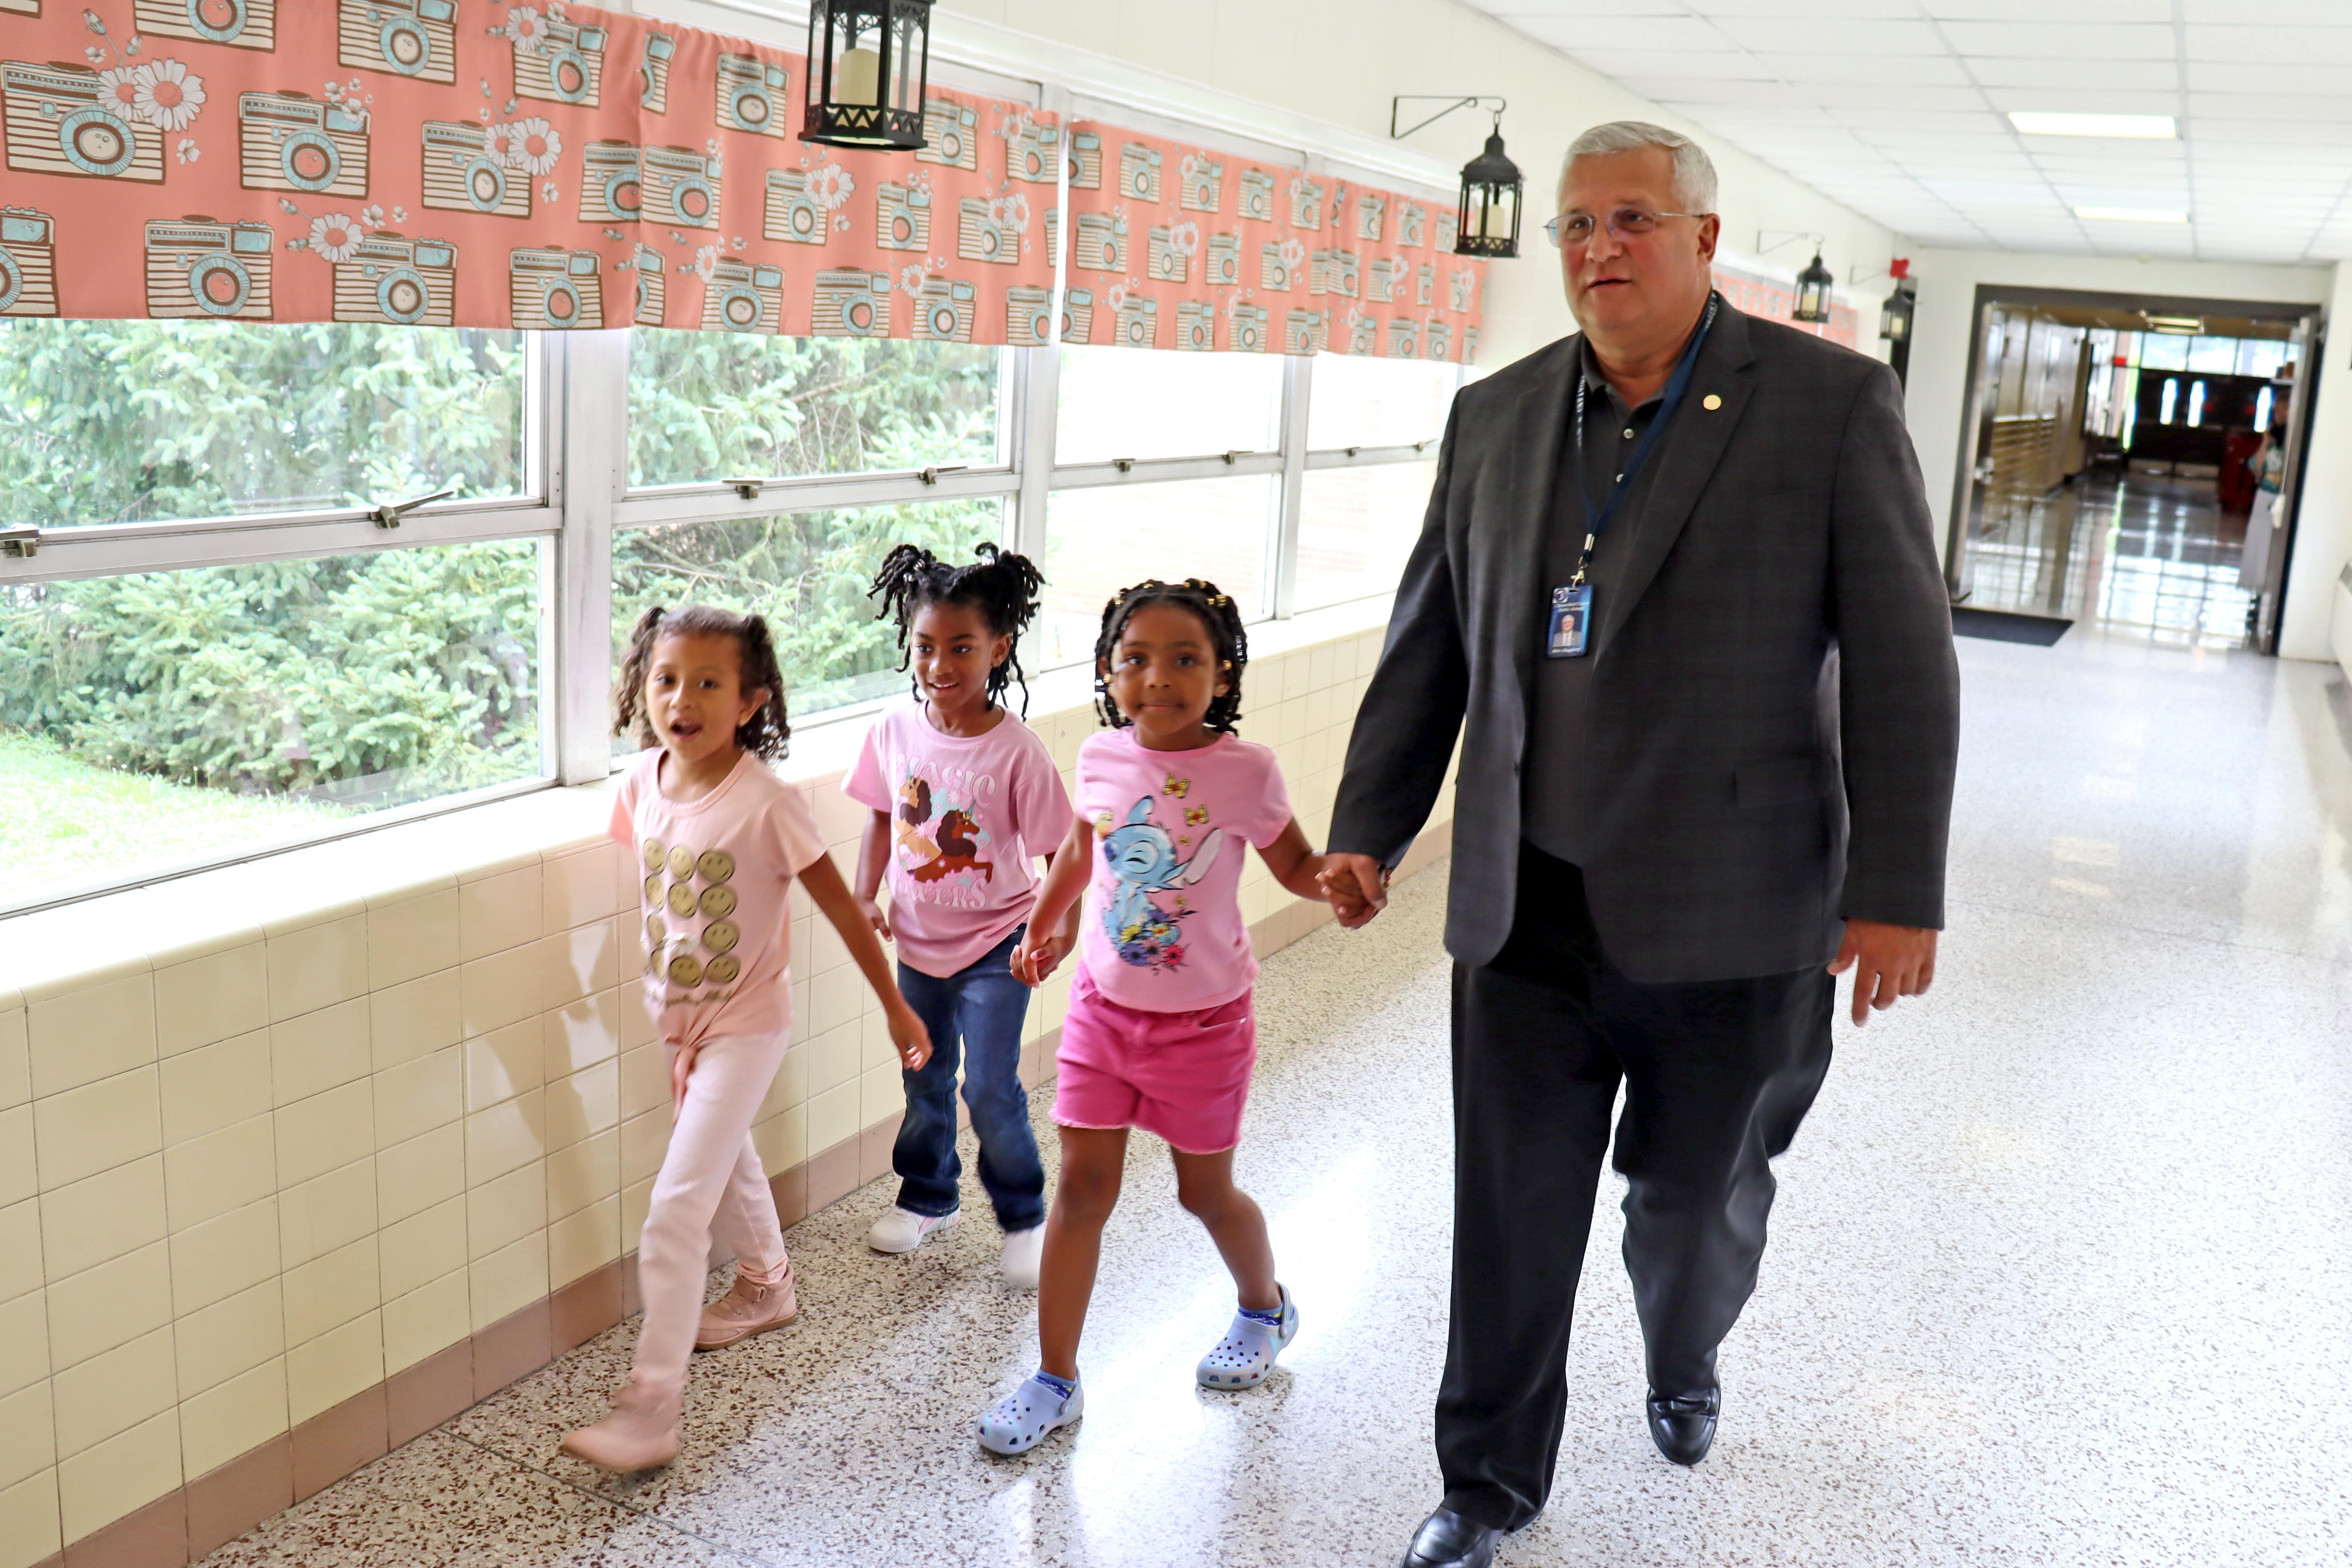 Superintendent walking with three students down the school hallway